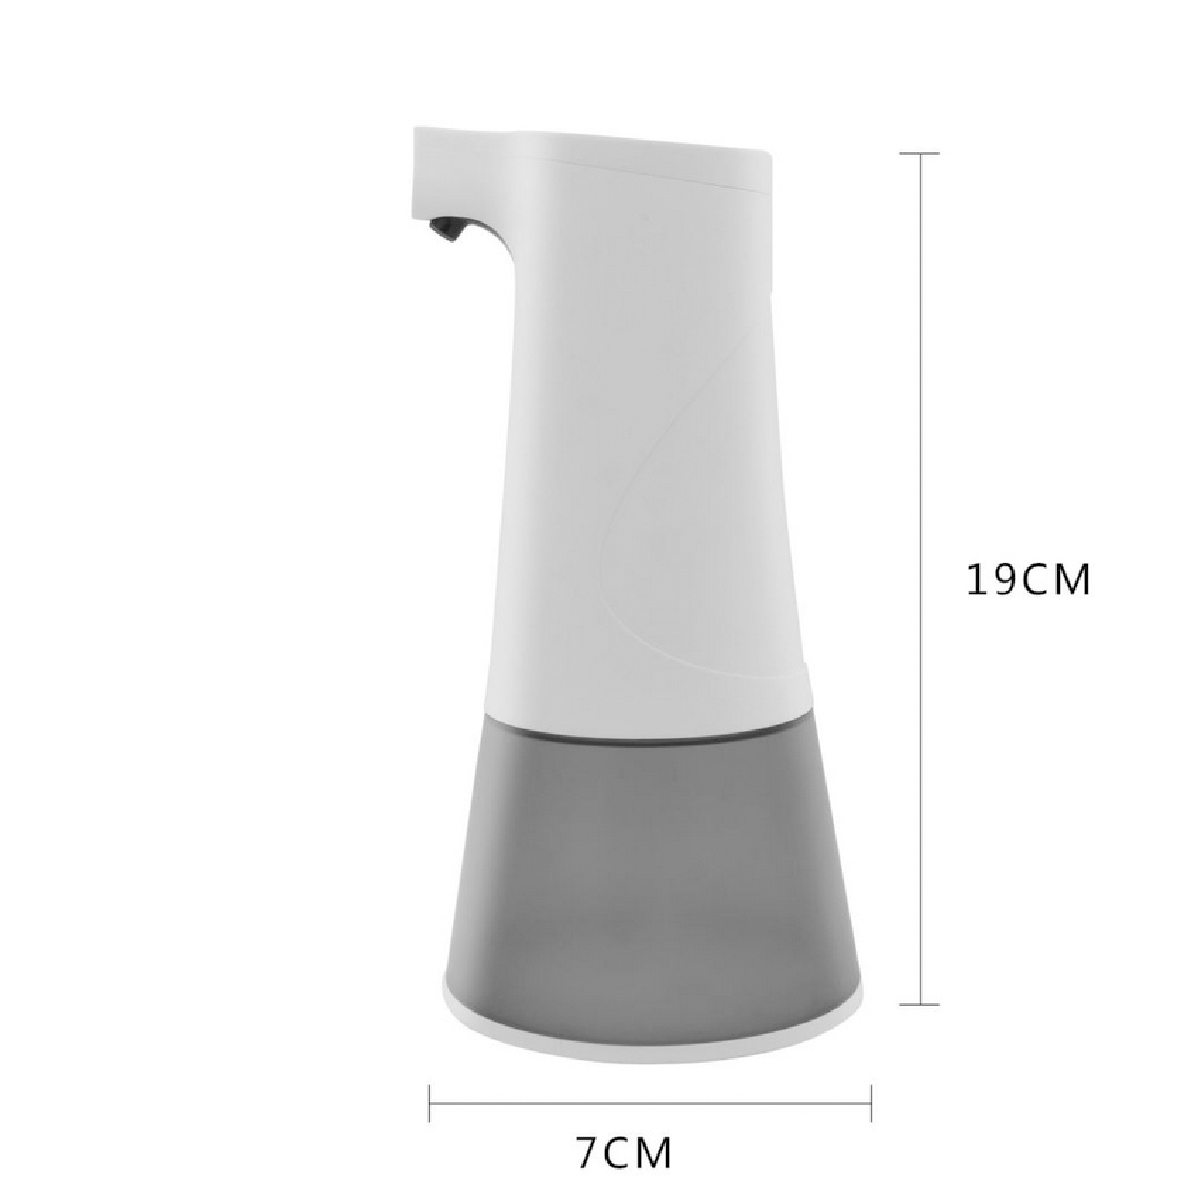 350ml-Infrared-Sensor-Automatic-Soap-Dispenser-Touchless-Stand-Foam-Hand-Washer-1669806-2